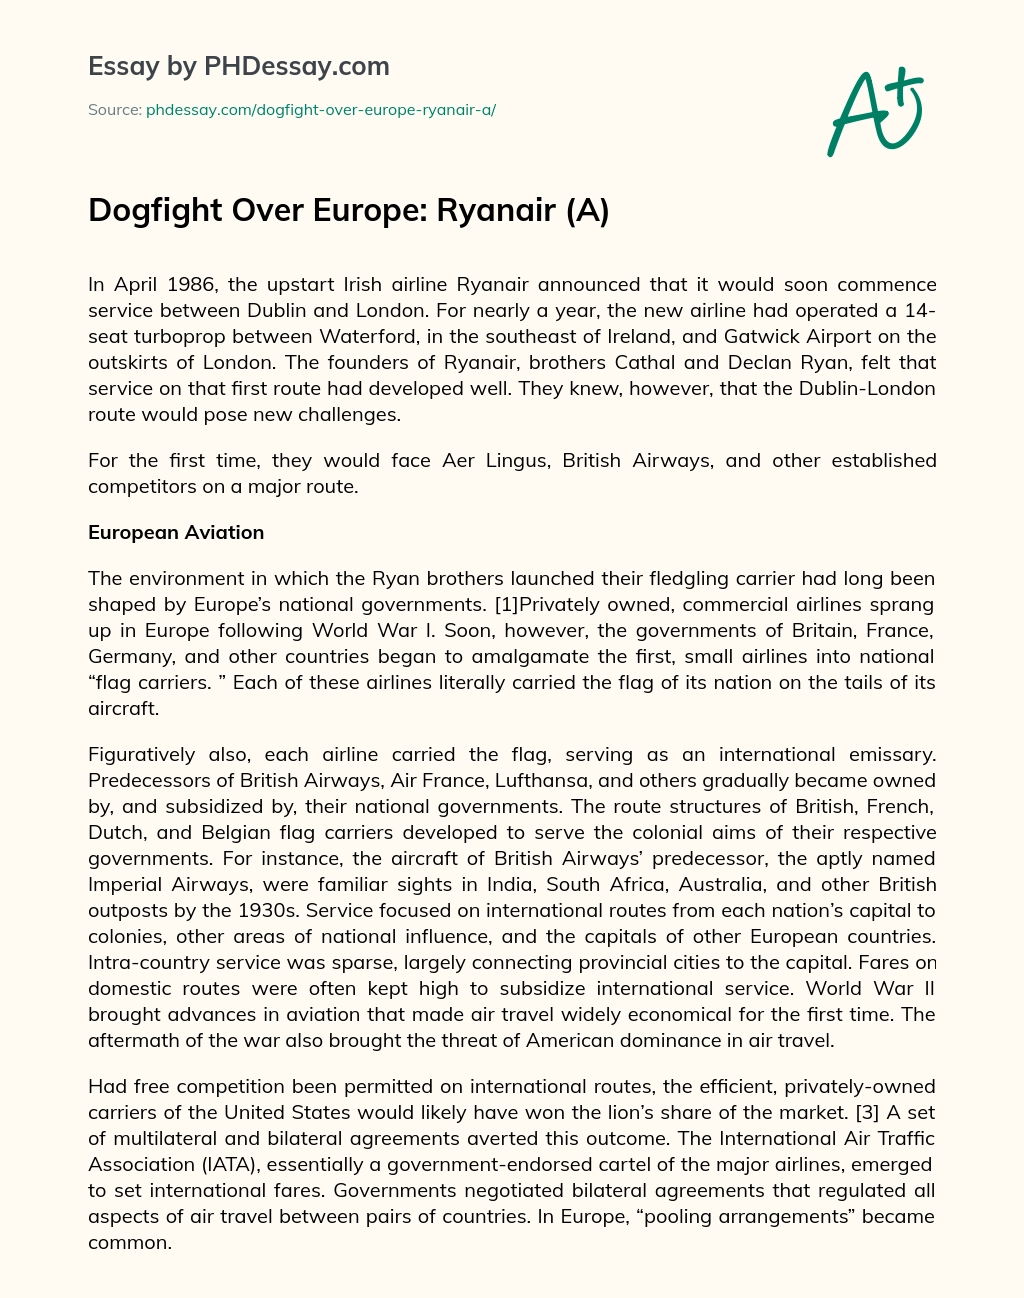 Dogfight Over Europe: Ryanair (A) essay